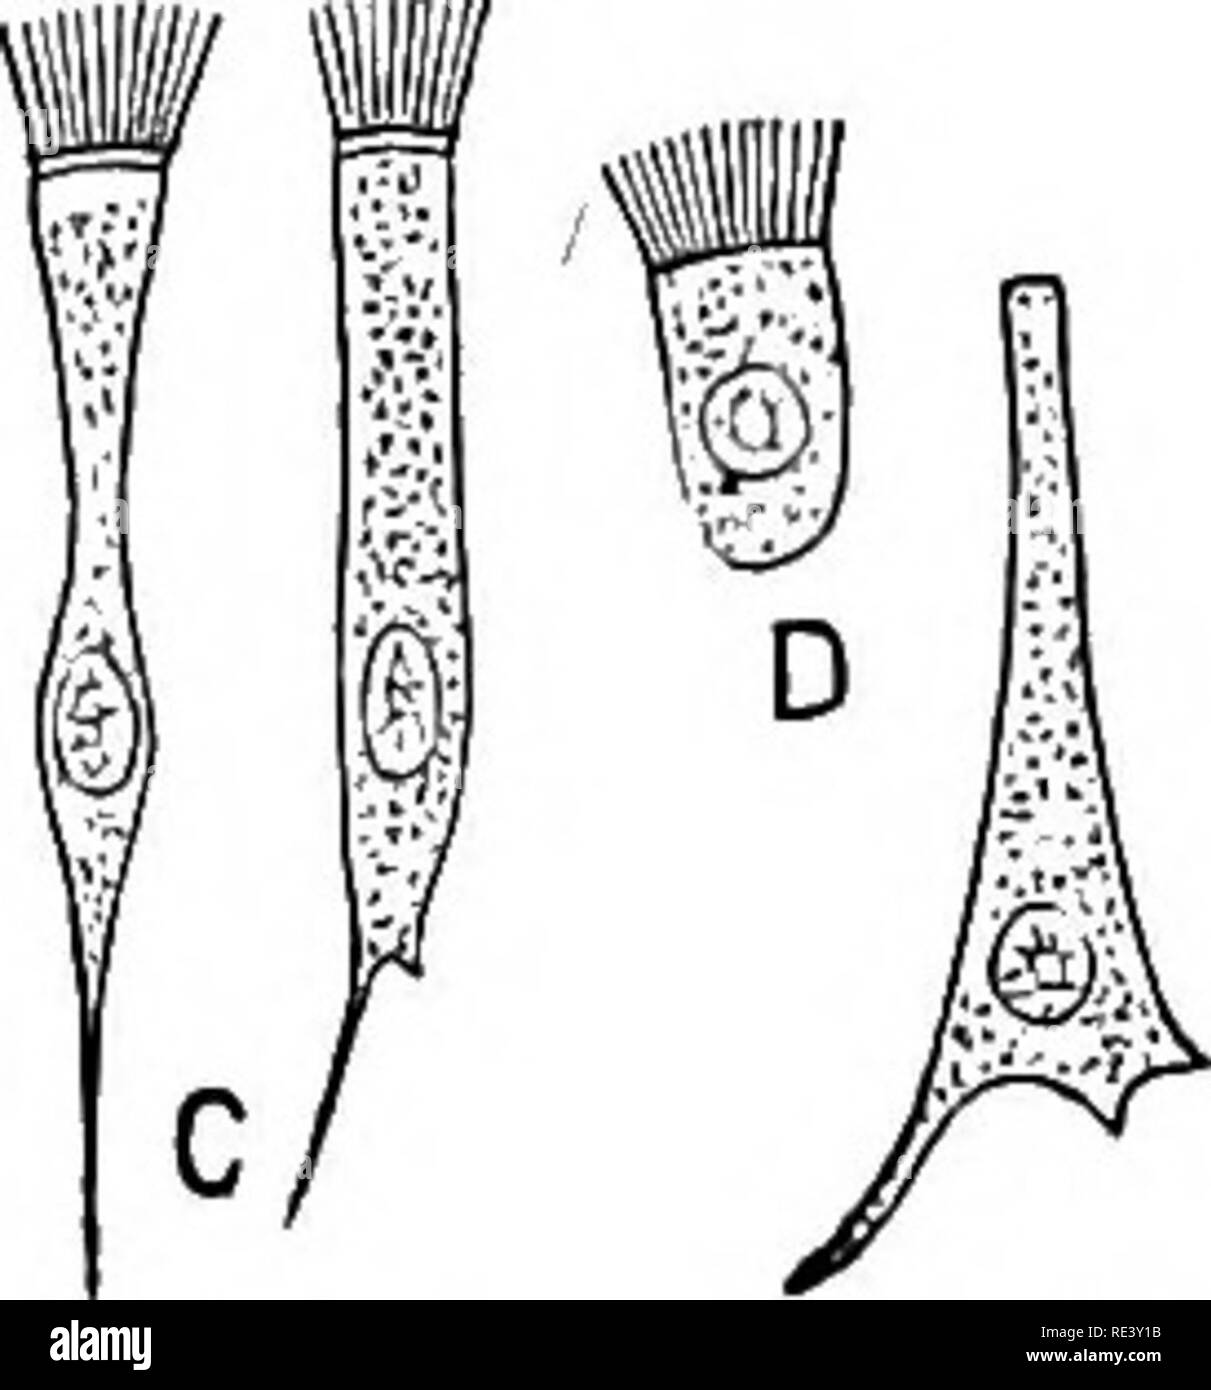 . The physiology of domestic animals ... Physiology, Comparative; Veterinary physiology. Fig. 20.—Non-Stkiated Muscular Fibkes, Isolated. (Klein.) The crosa-markings-indicate corrugations of the elastic sheath of the individual fibres. ^&quot;^IT- MiT -' *. Fig. 21.—Various Kinds of Epithelial Cells. (Klein.) A, columnar cells of intestine; B, polyhedral cells of the conjunctiva; C, ciliated conical cells of the trachea: D, ciliated cell of frog's mouth; E, inverted conical cell of trachea; F, squamous cell of the cavity of the mouth, seen from its broad surface ; G, squamous cell, seen edgewa Stock Photo